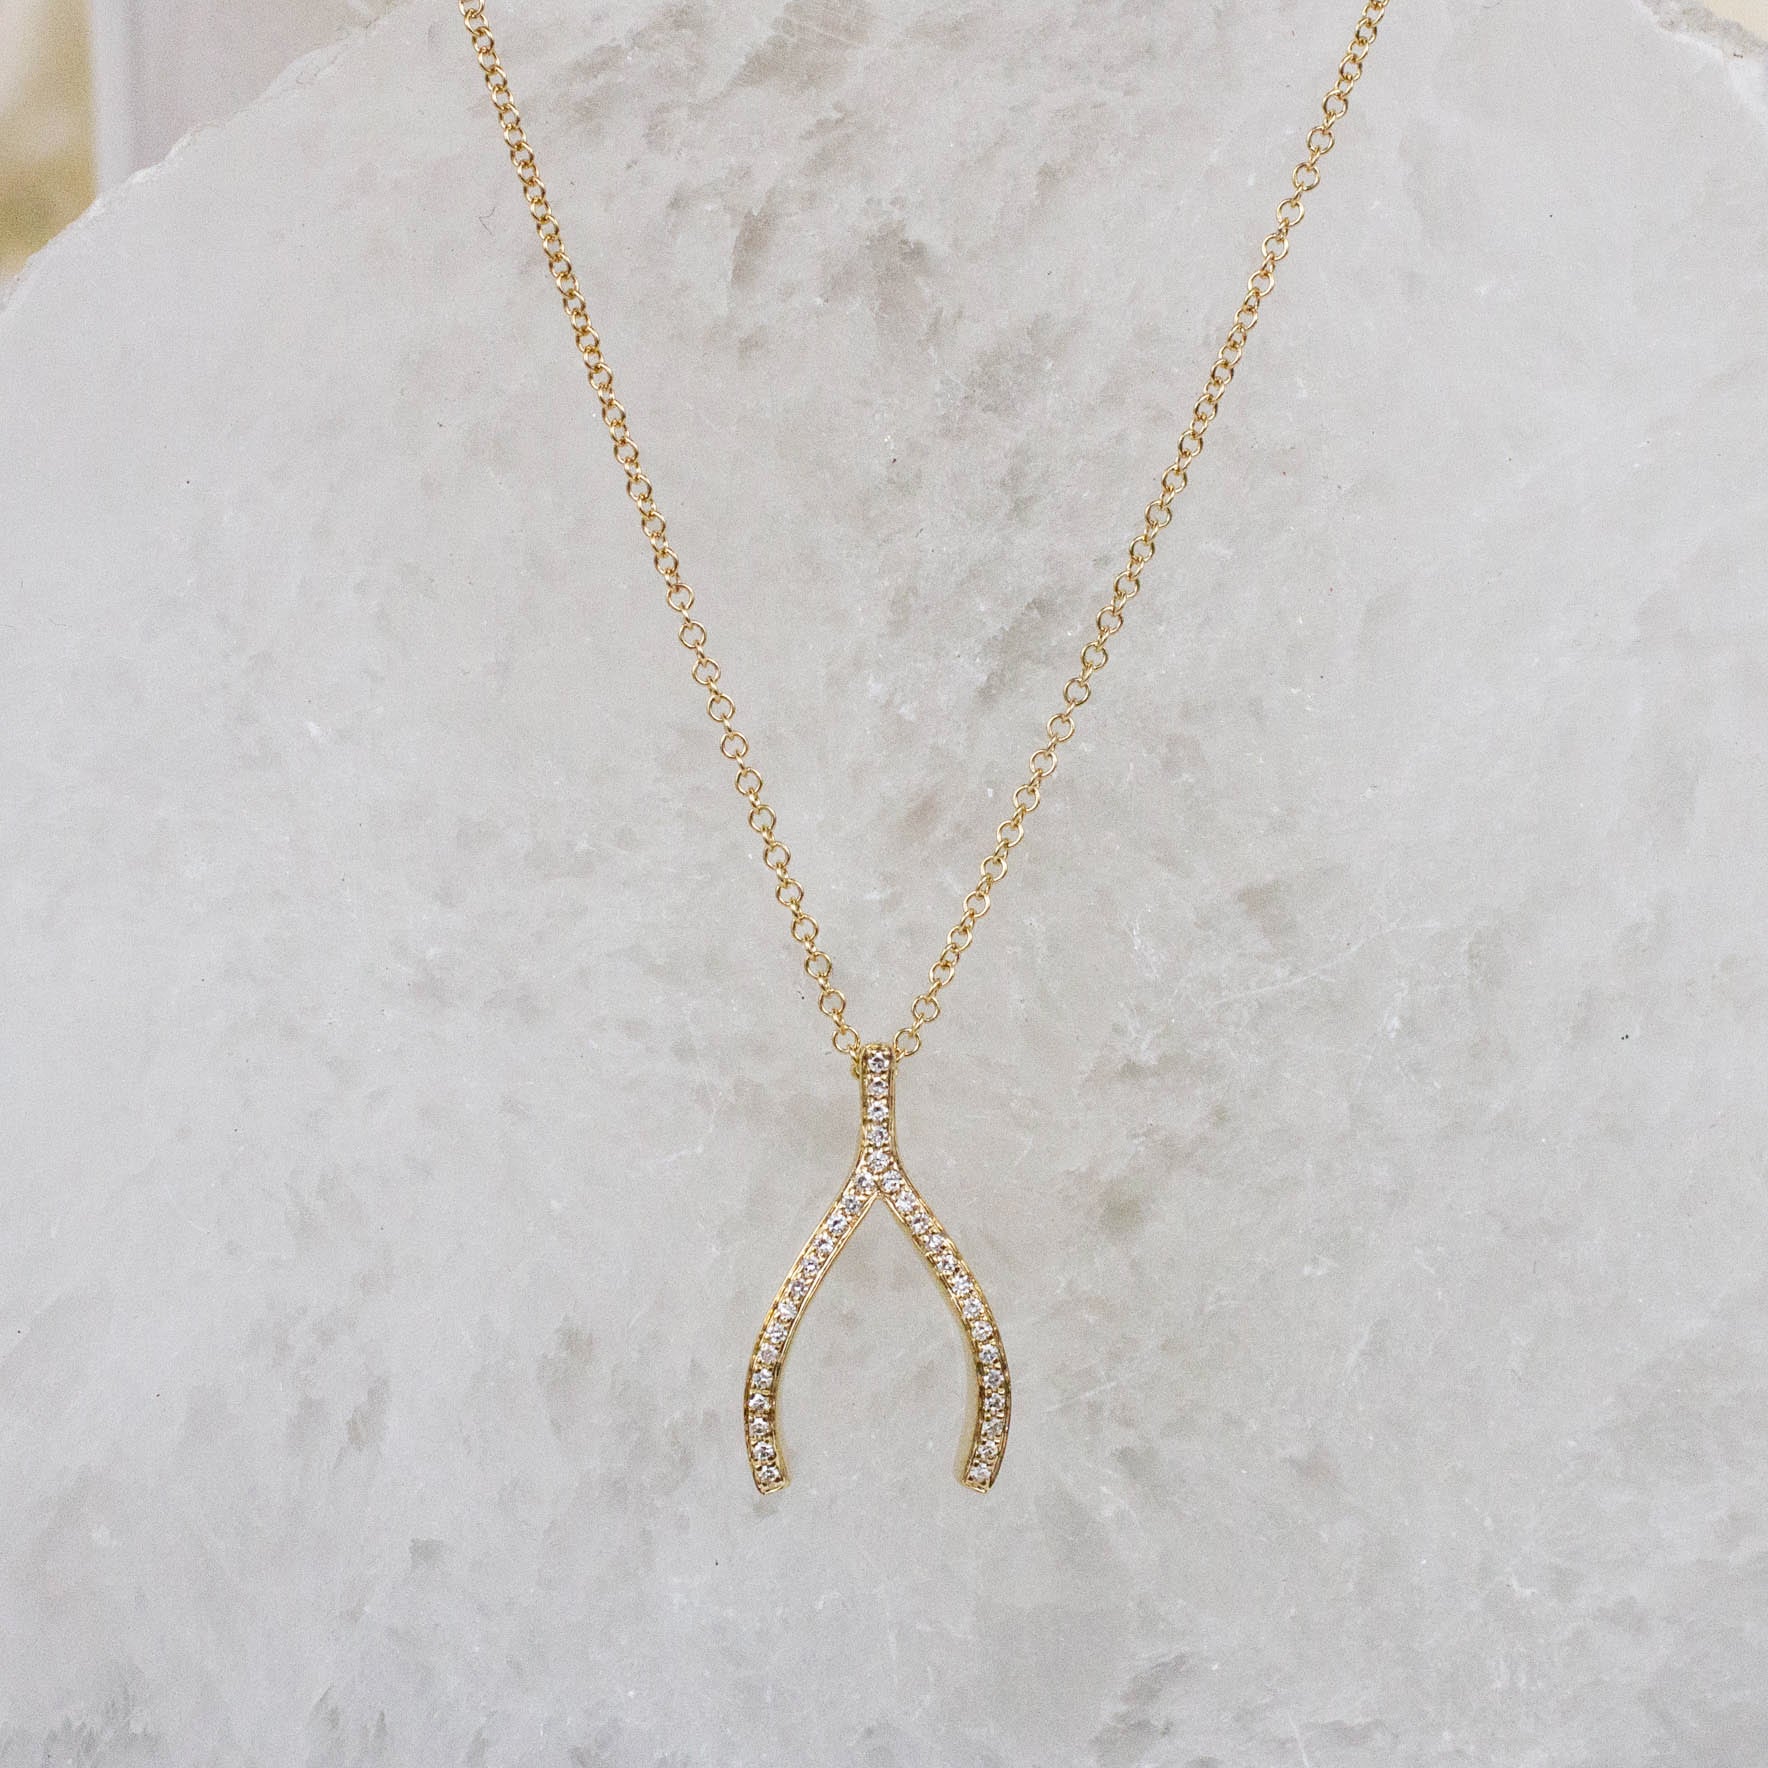 Gold Wishbone necklace, Gold Dainty Necklace, Simple Gold wish bone Necklace  - AliExpress